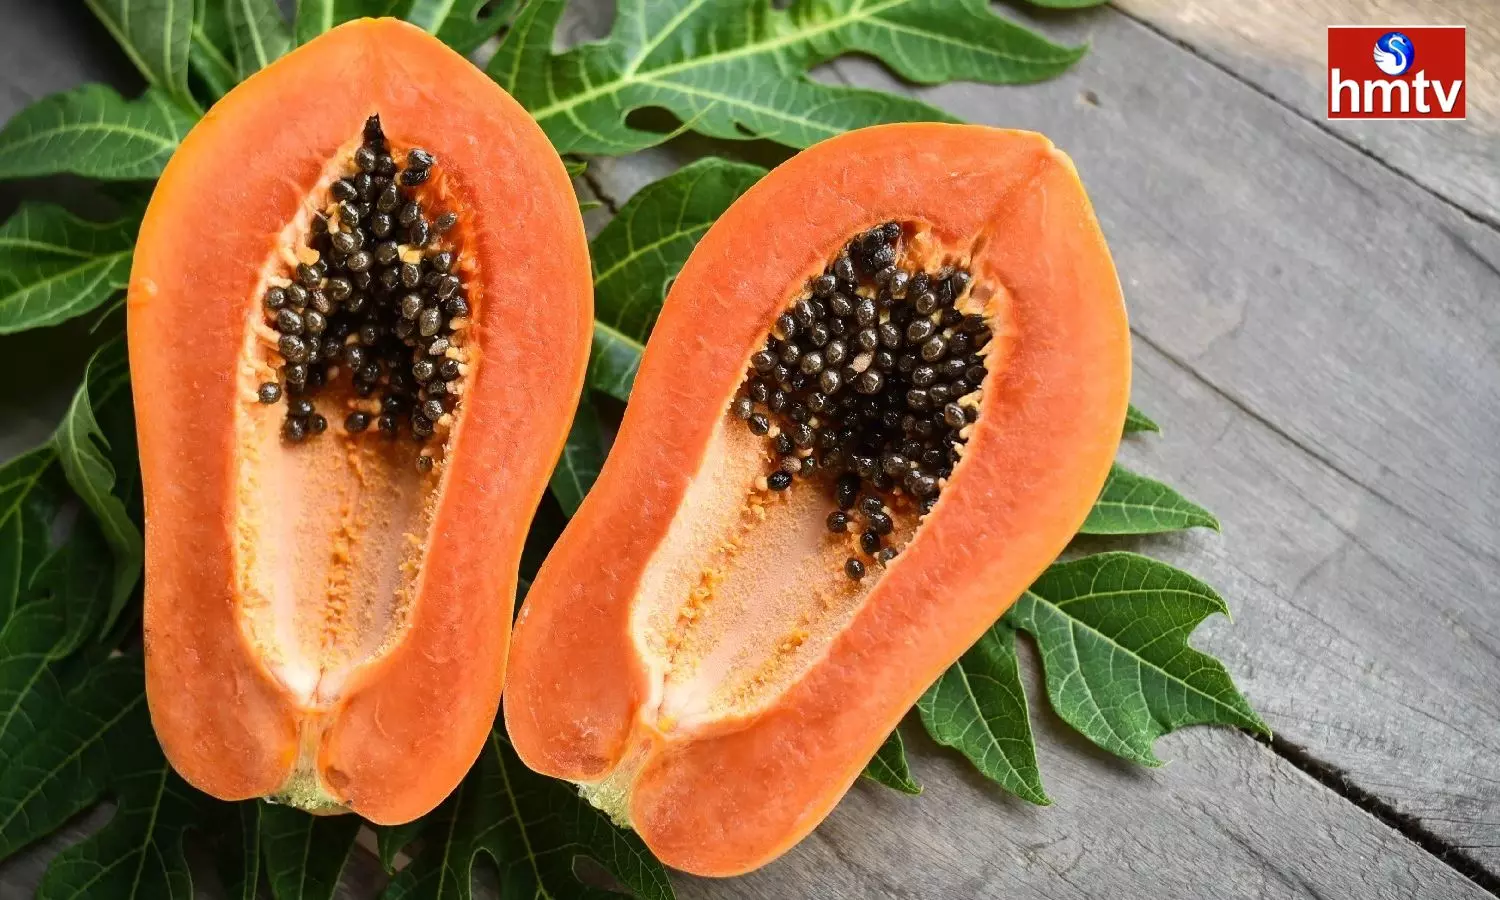 Health and illness with papaya If you have these Health Problems you should not Eat it